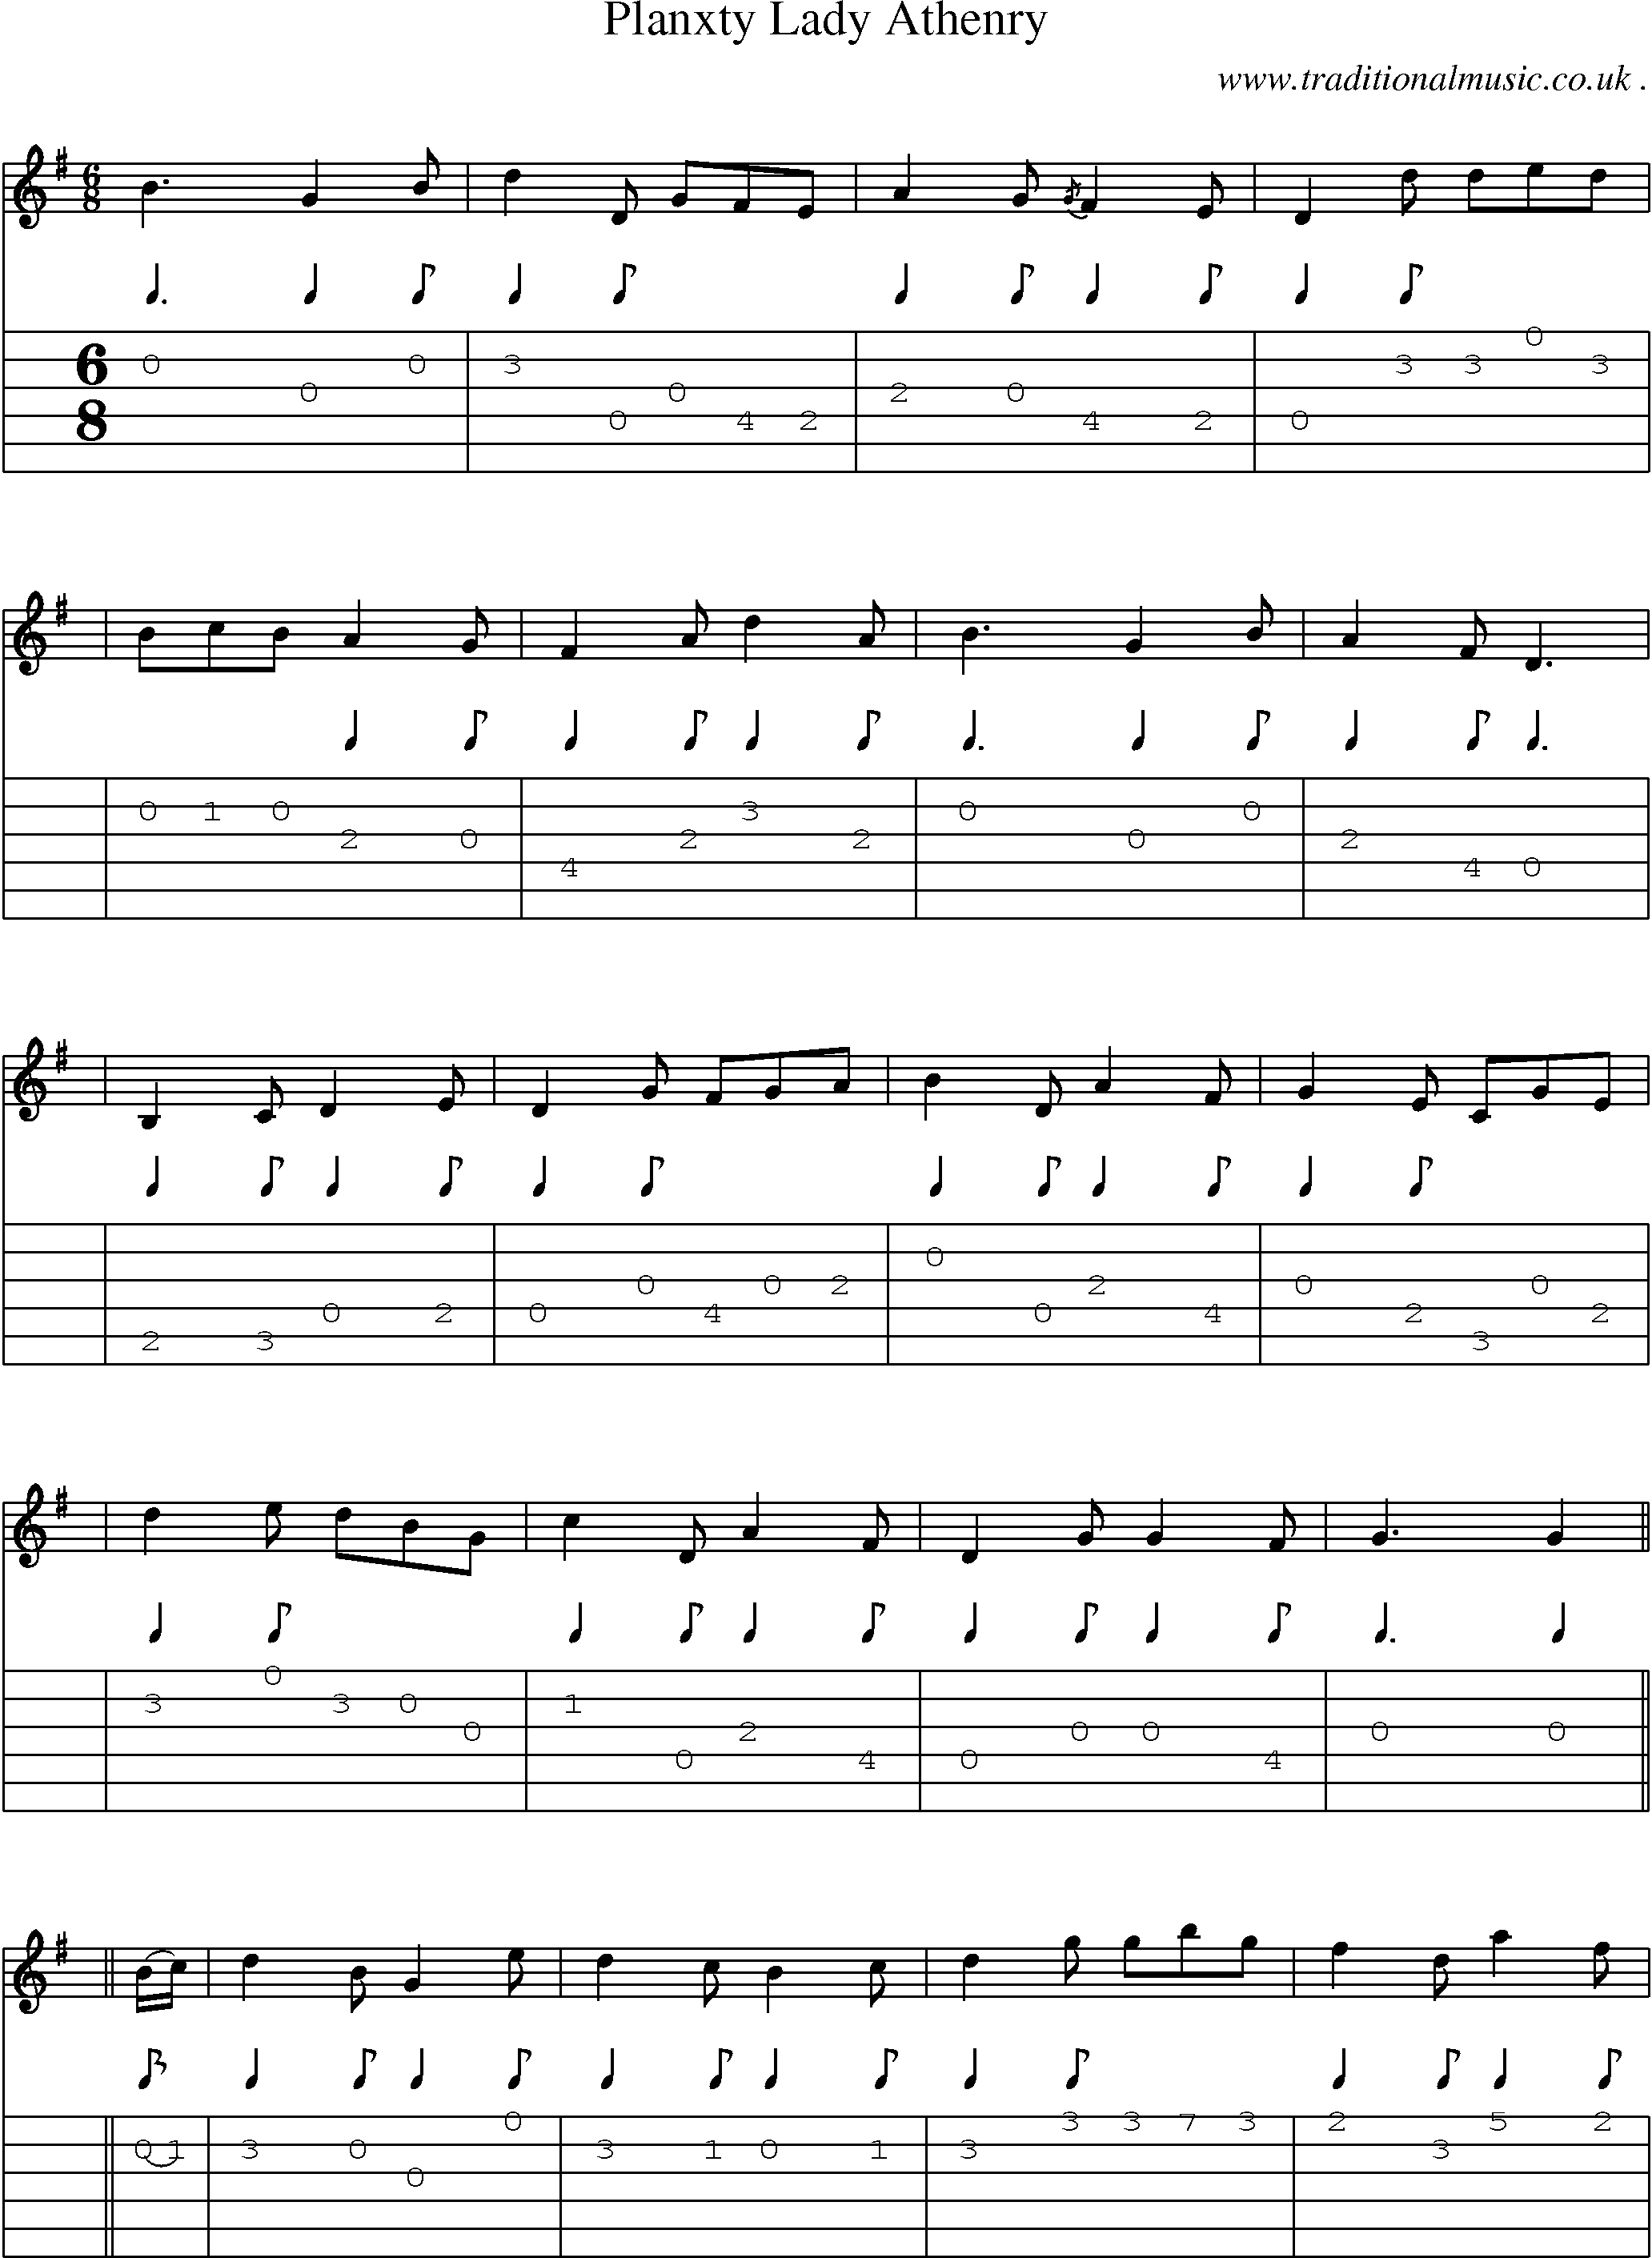 Sheet-music  score, Chords and Guitar Tabs for Planxty Lady Athenry